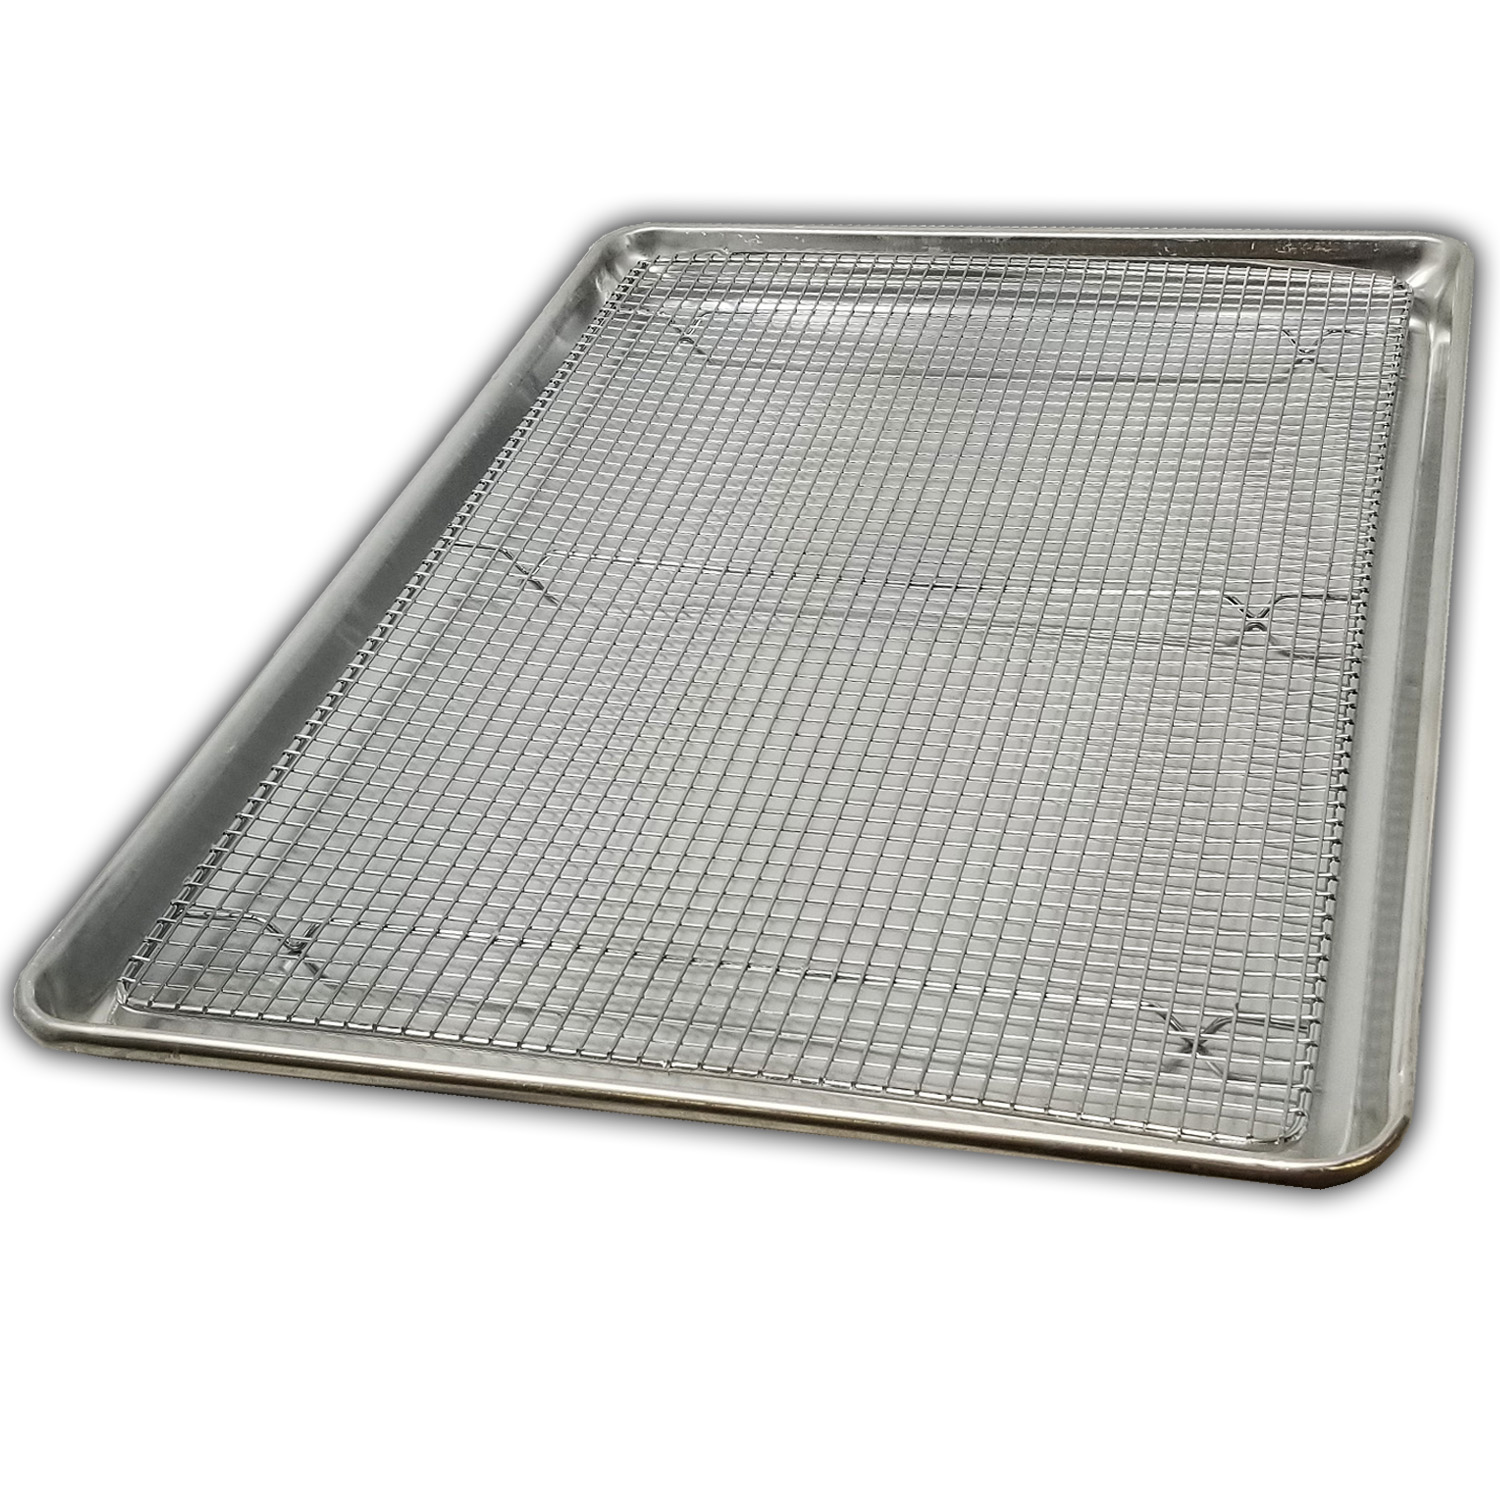 best baking sheet with wire rack